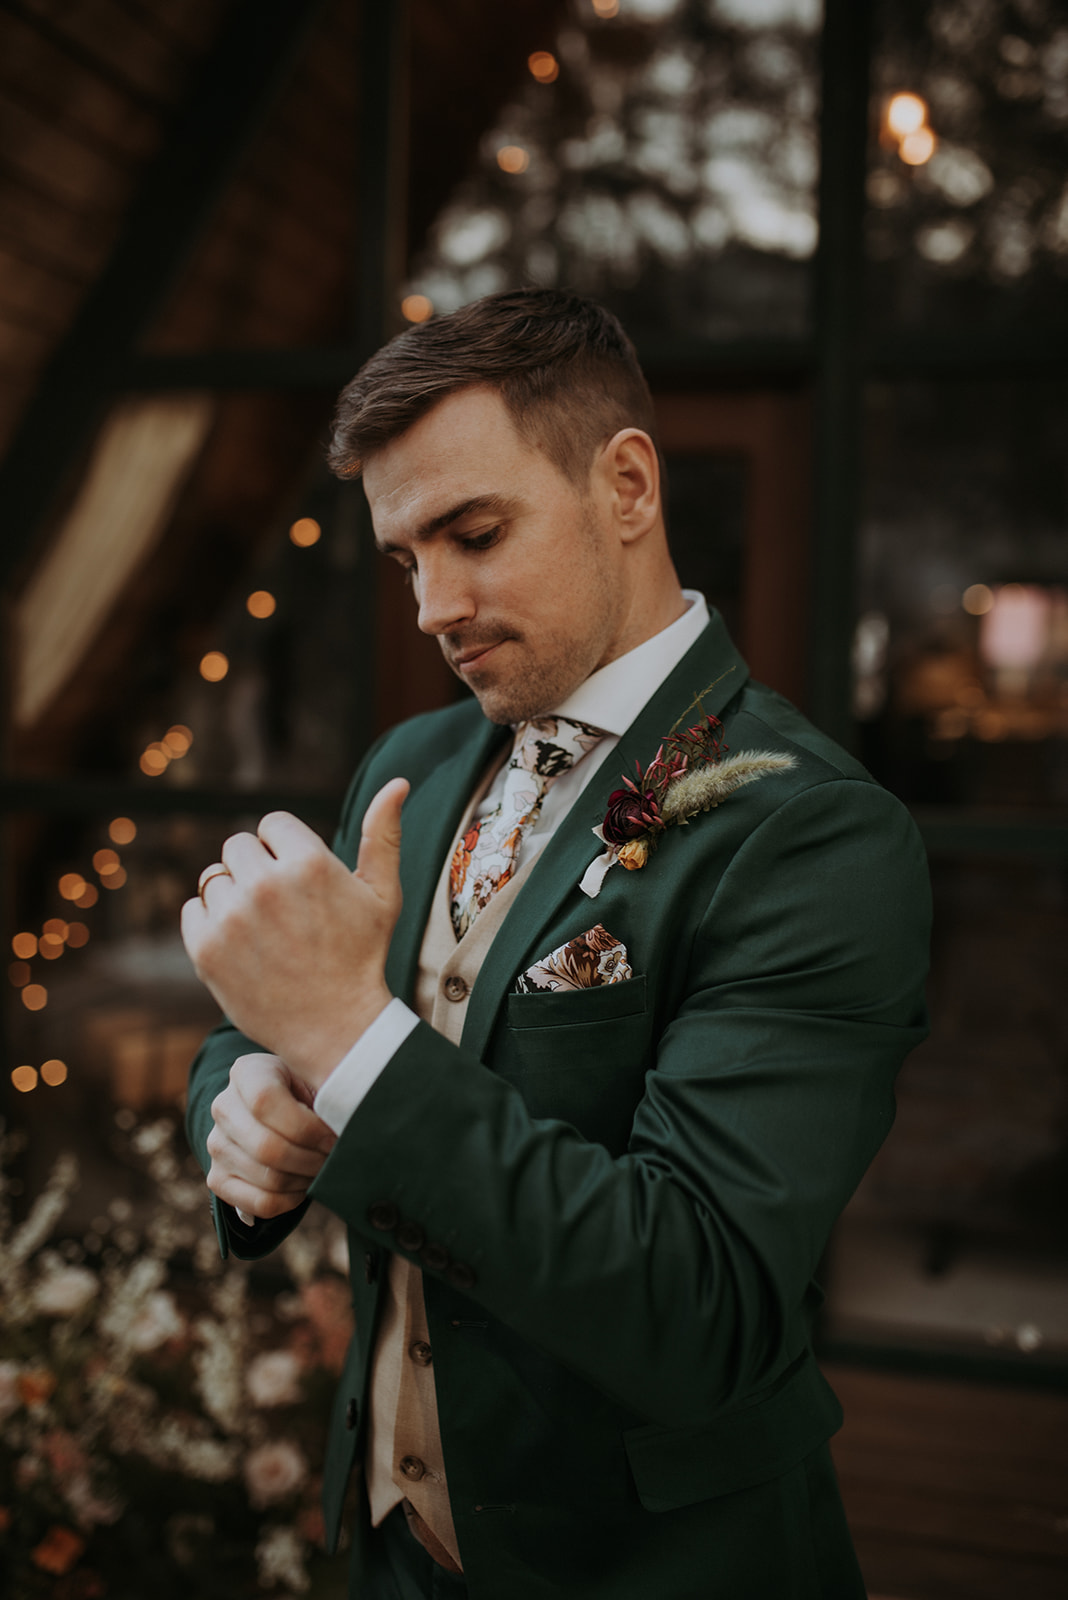 Mount Rainier elopement photographer captures intimate moment at cozy a-frame cabin, Woodsy wedding details, groom photo